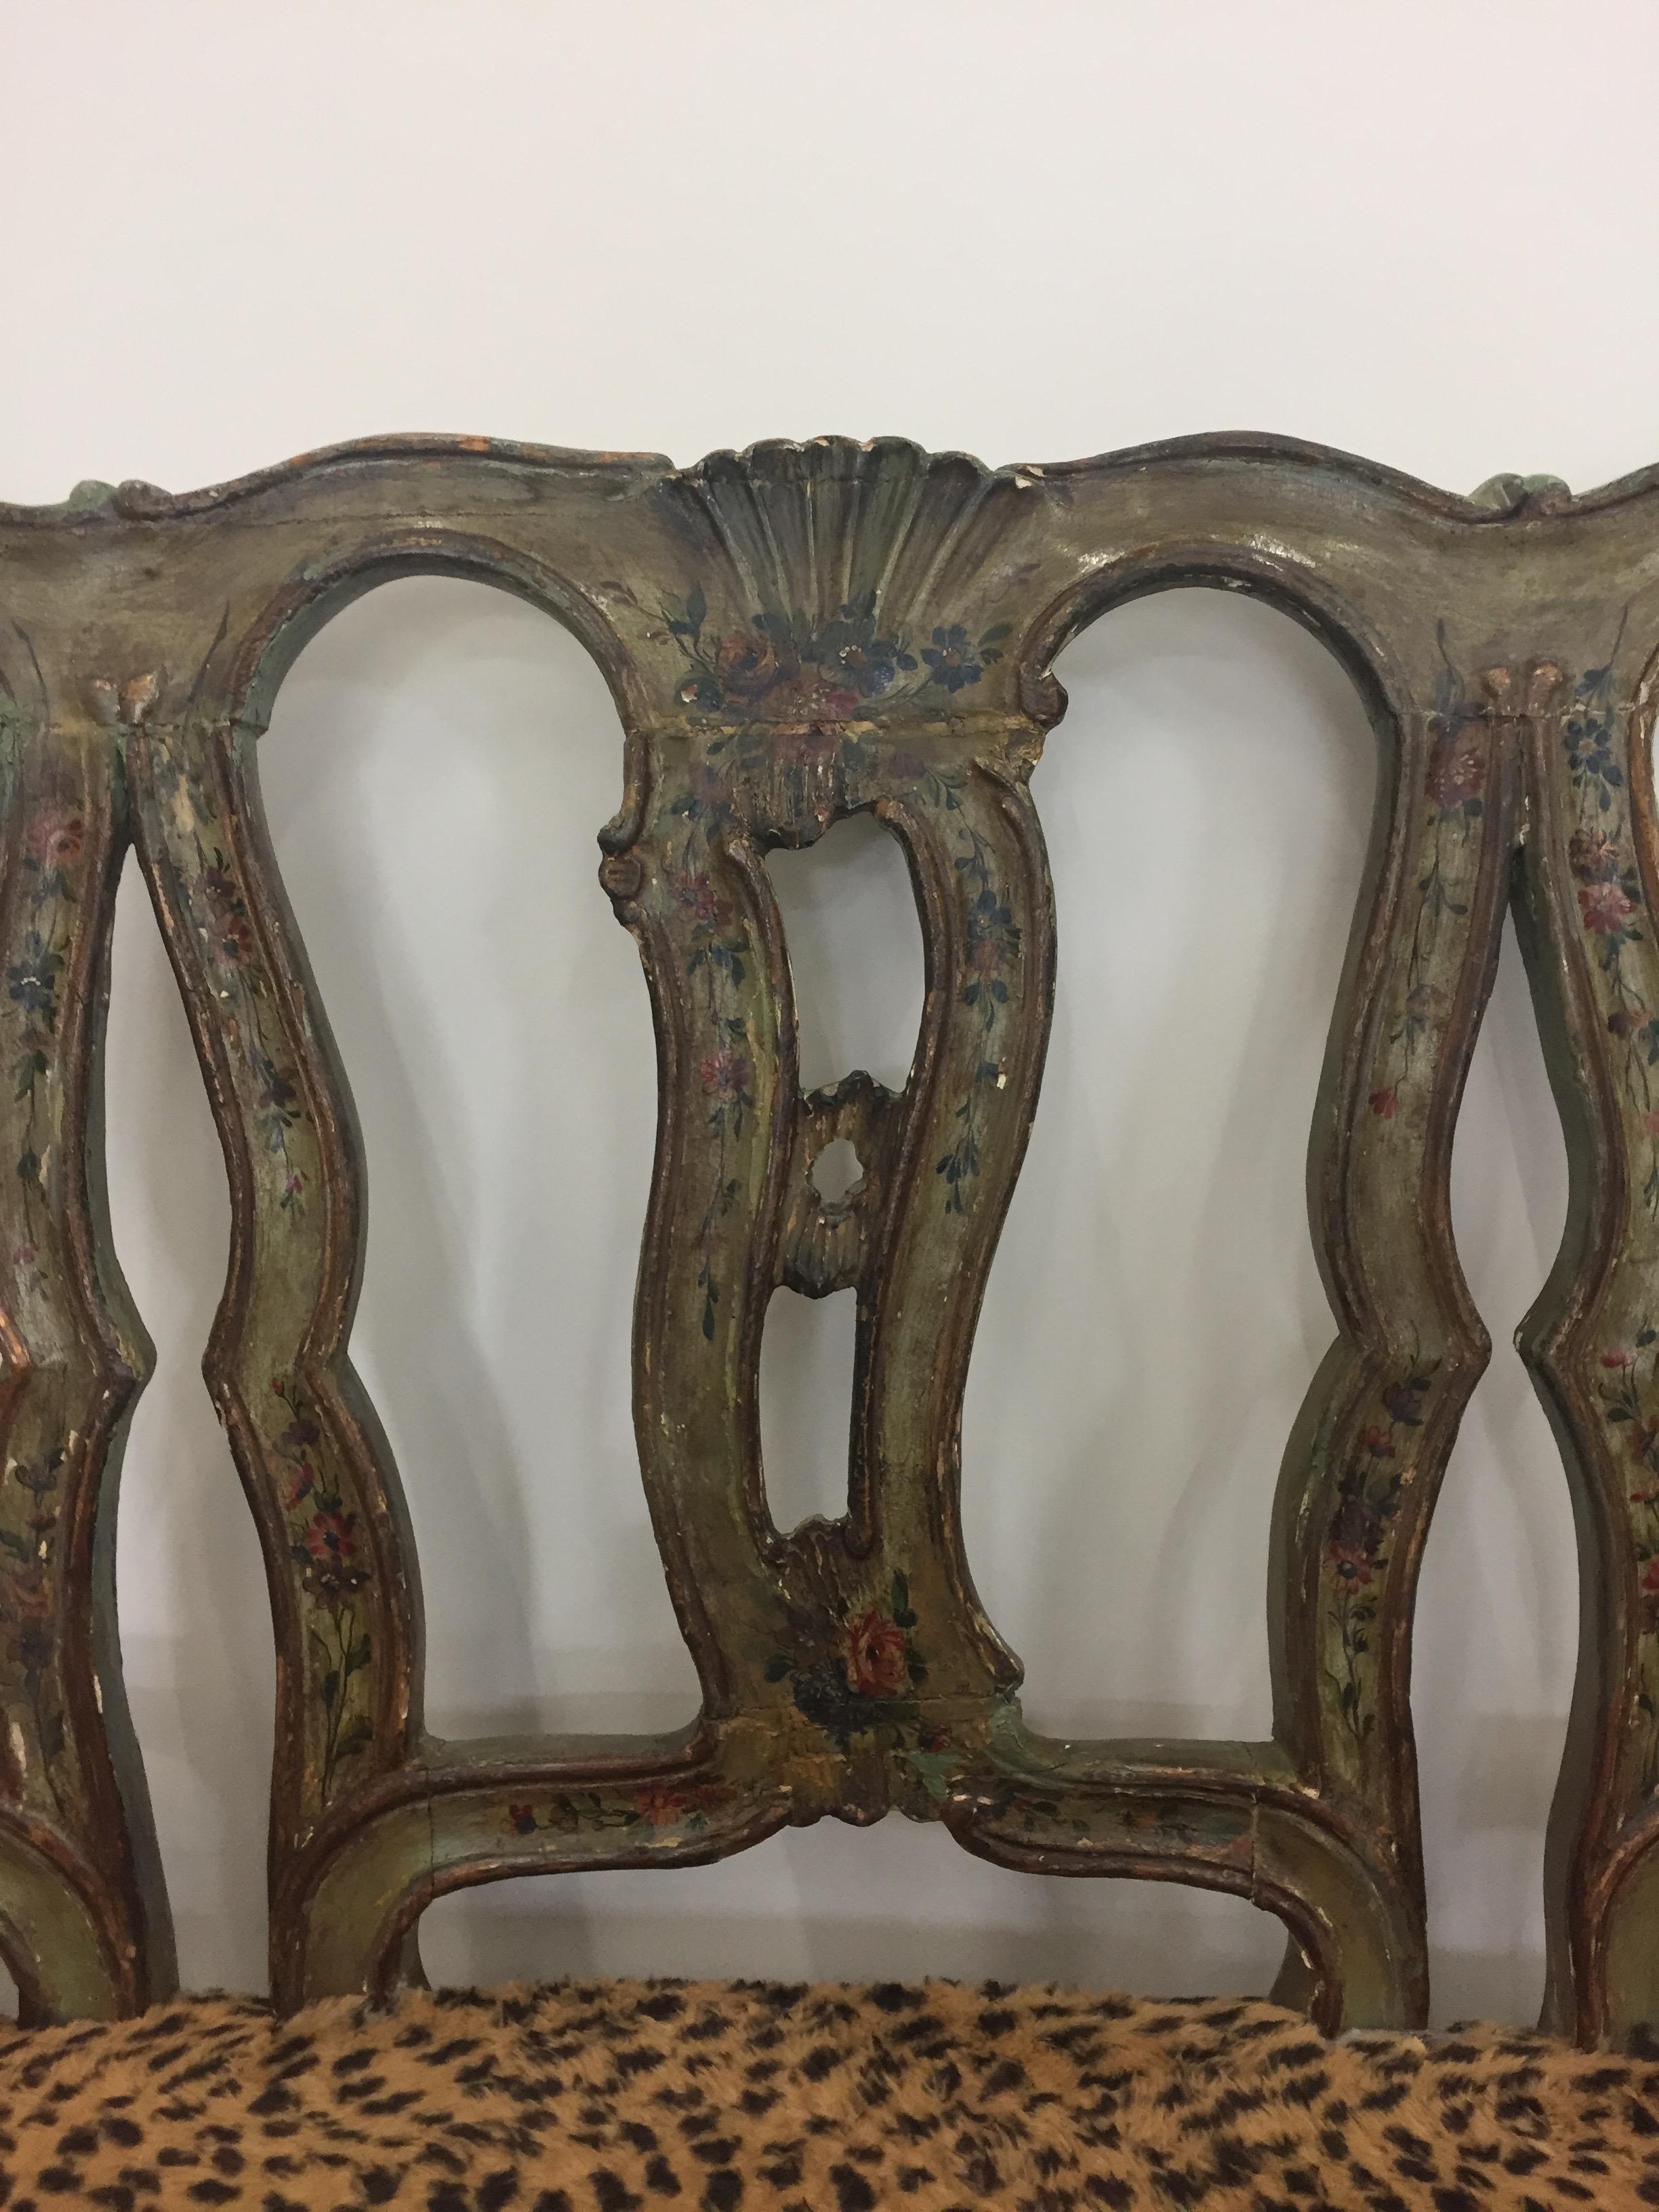 Mid-20th Century Beautiful Venetian Hand-Painted Loveseat Settee with Animal Print Upholstery